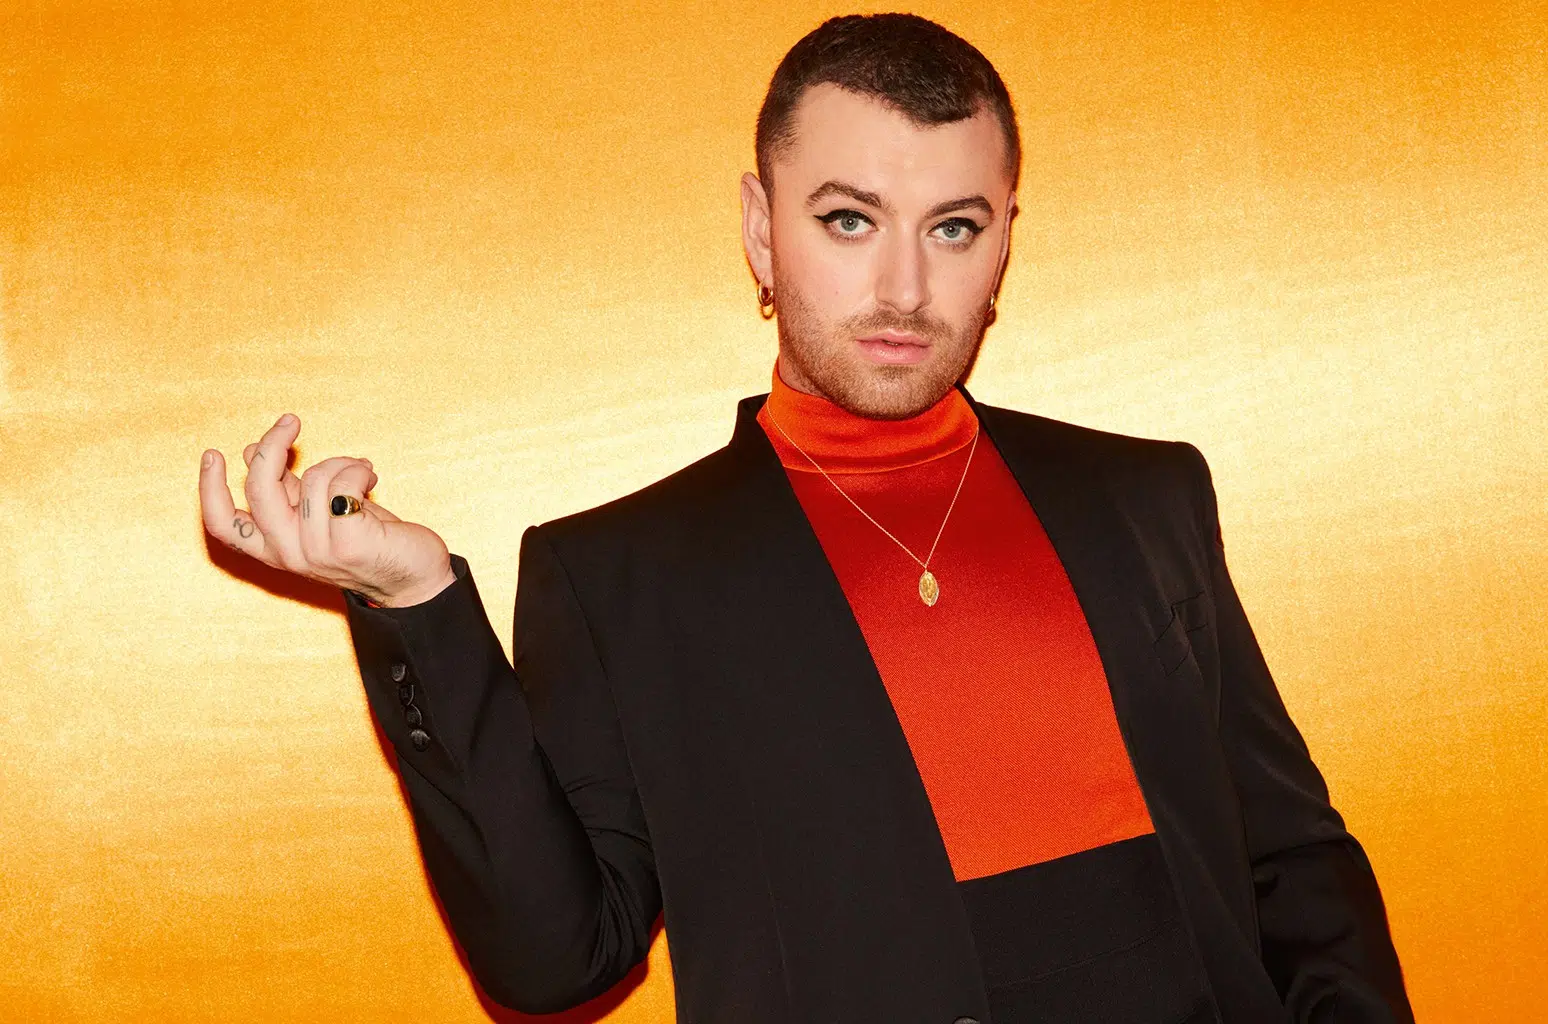 Sam Smith Says They Were Booted From Dating App Hinge: 'They Thought I Was a Catfish'